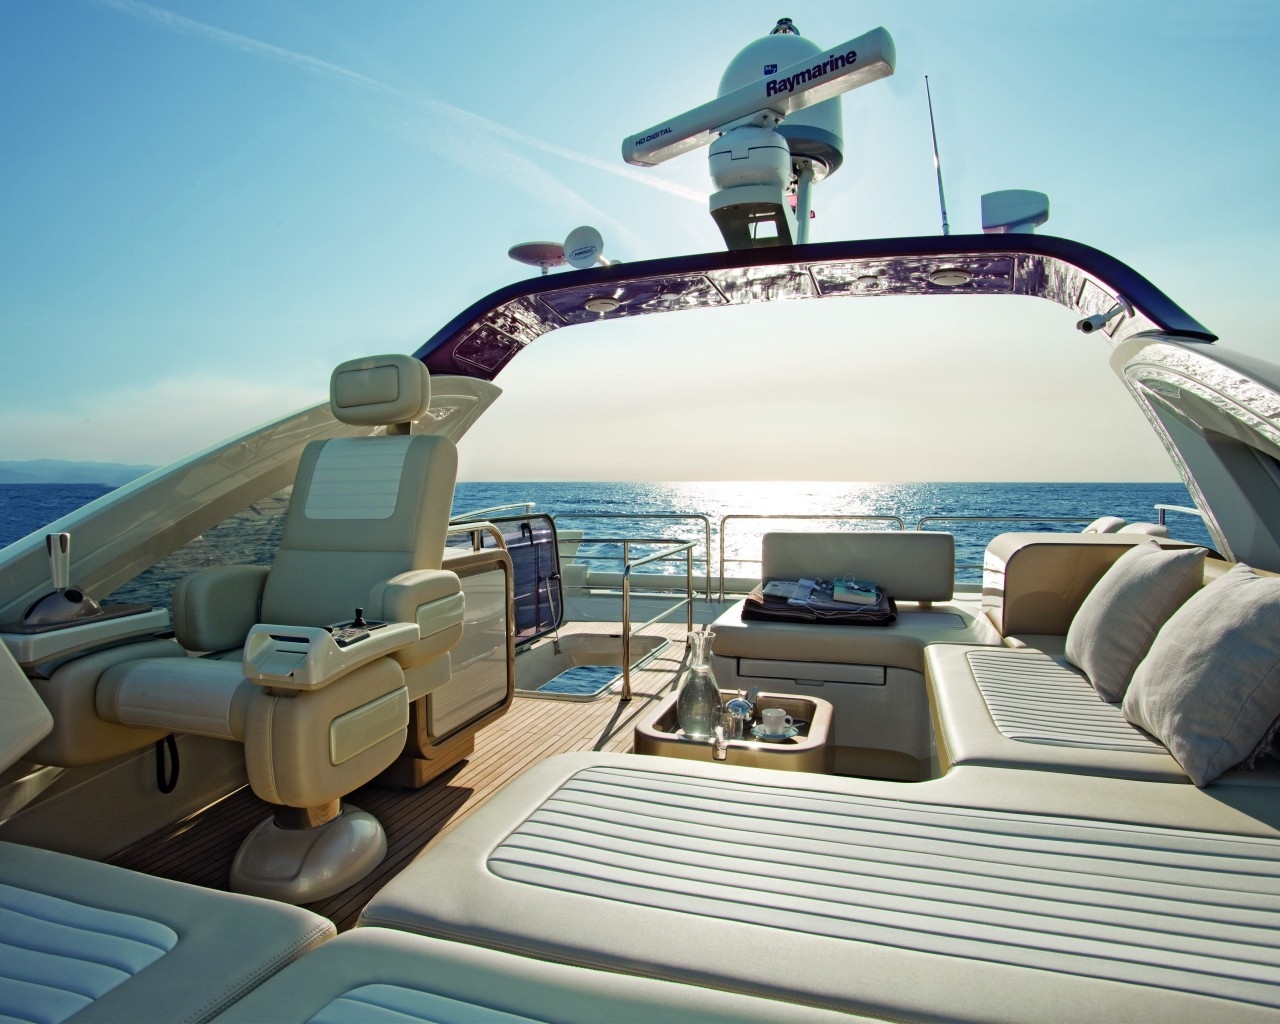 Lovely Luxury Yacht for 1280 x 1024 resolution